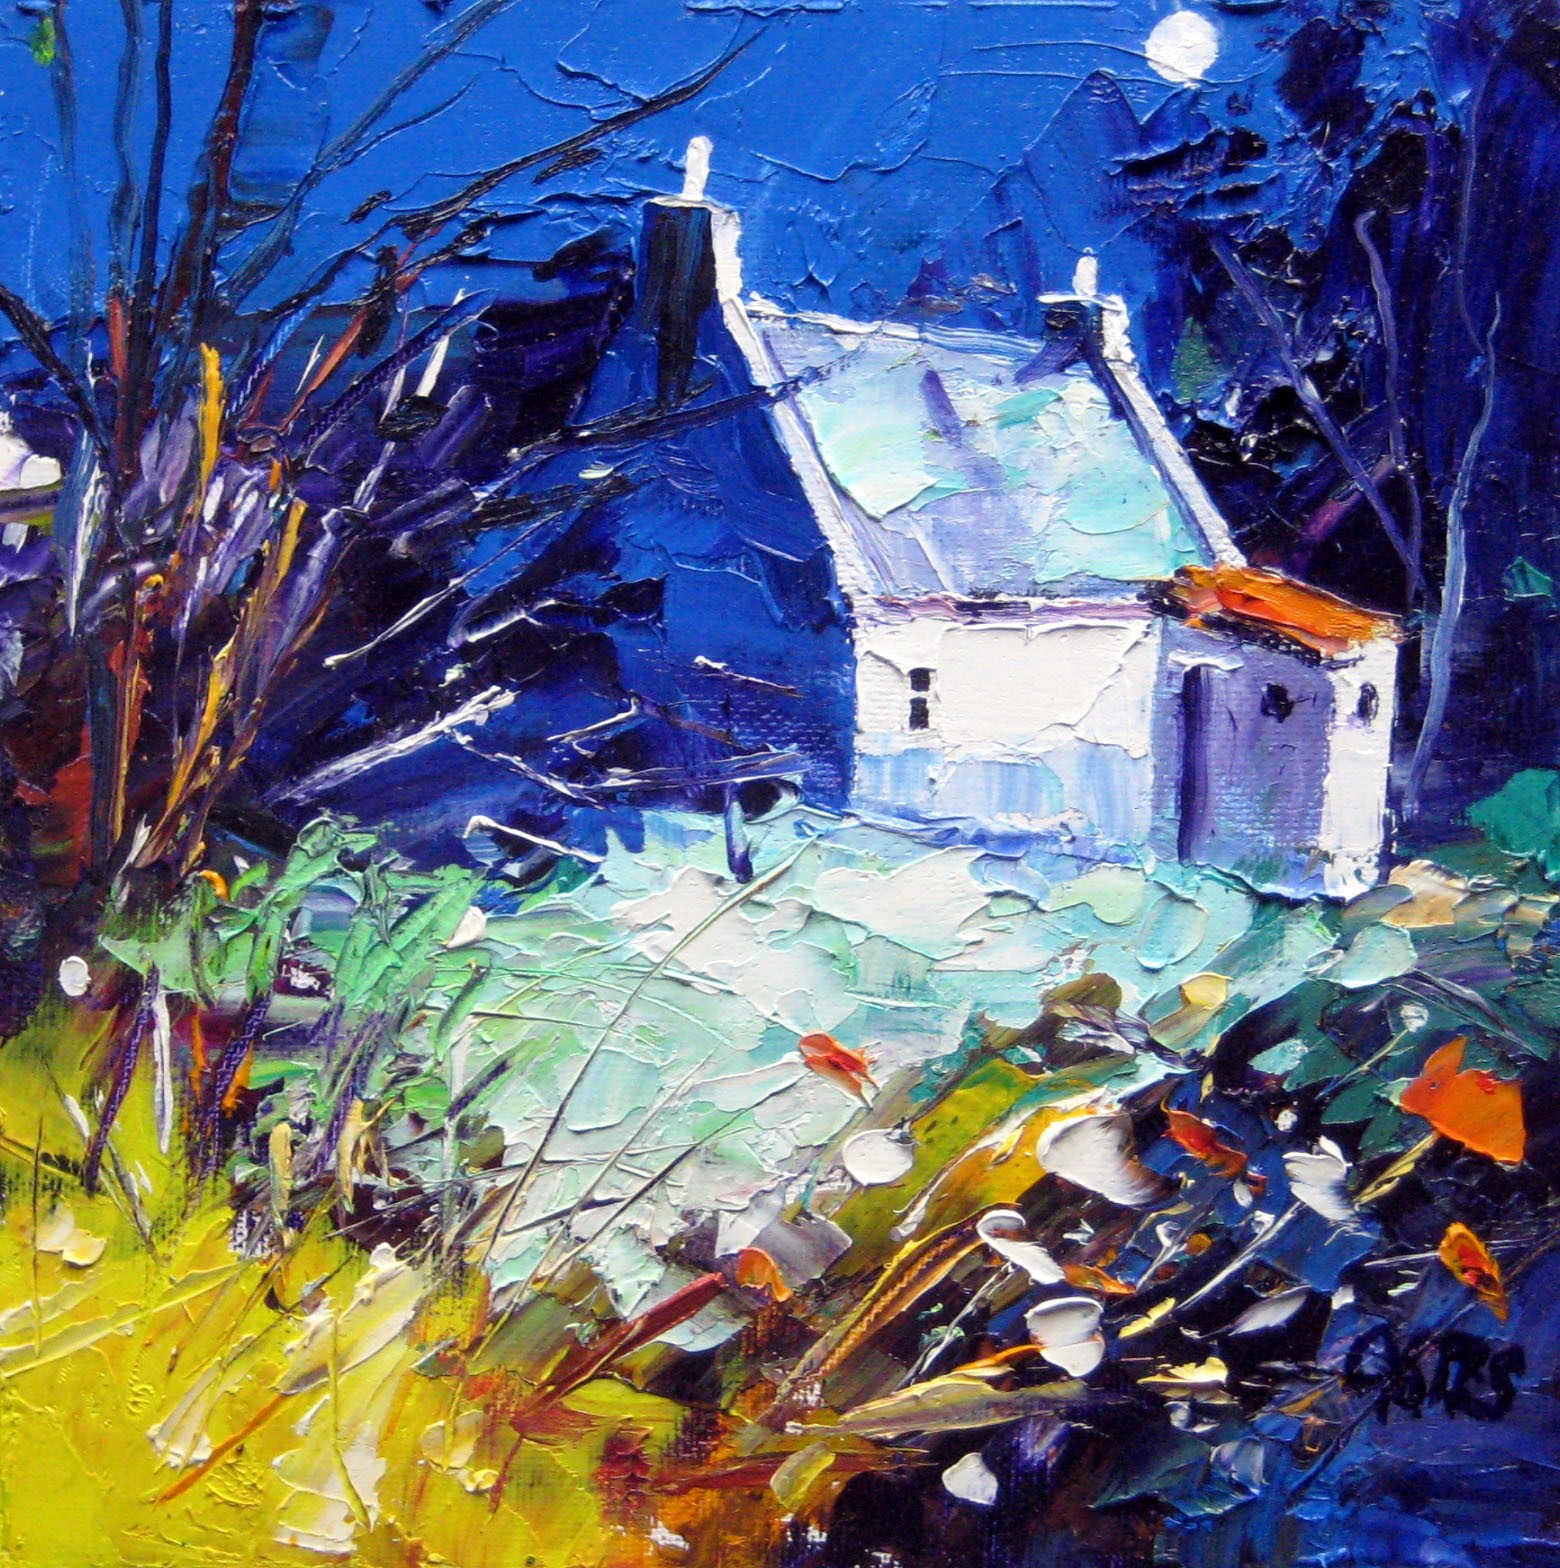 'Full Moon, Perthshire' by artist Martin Oates